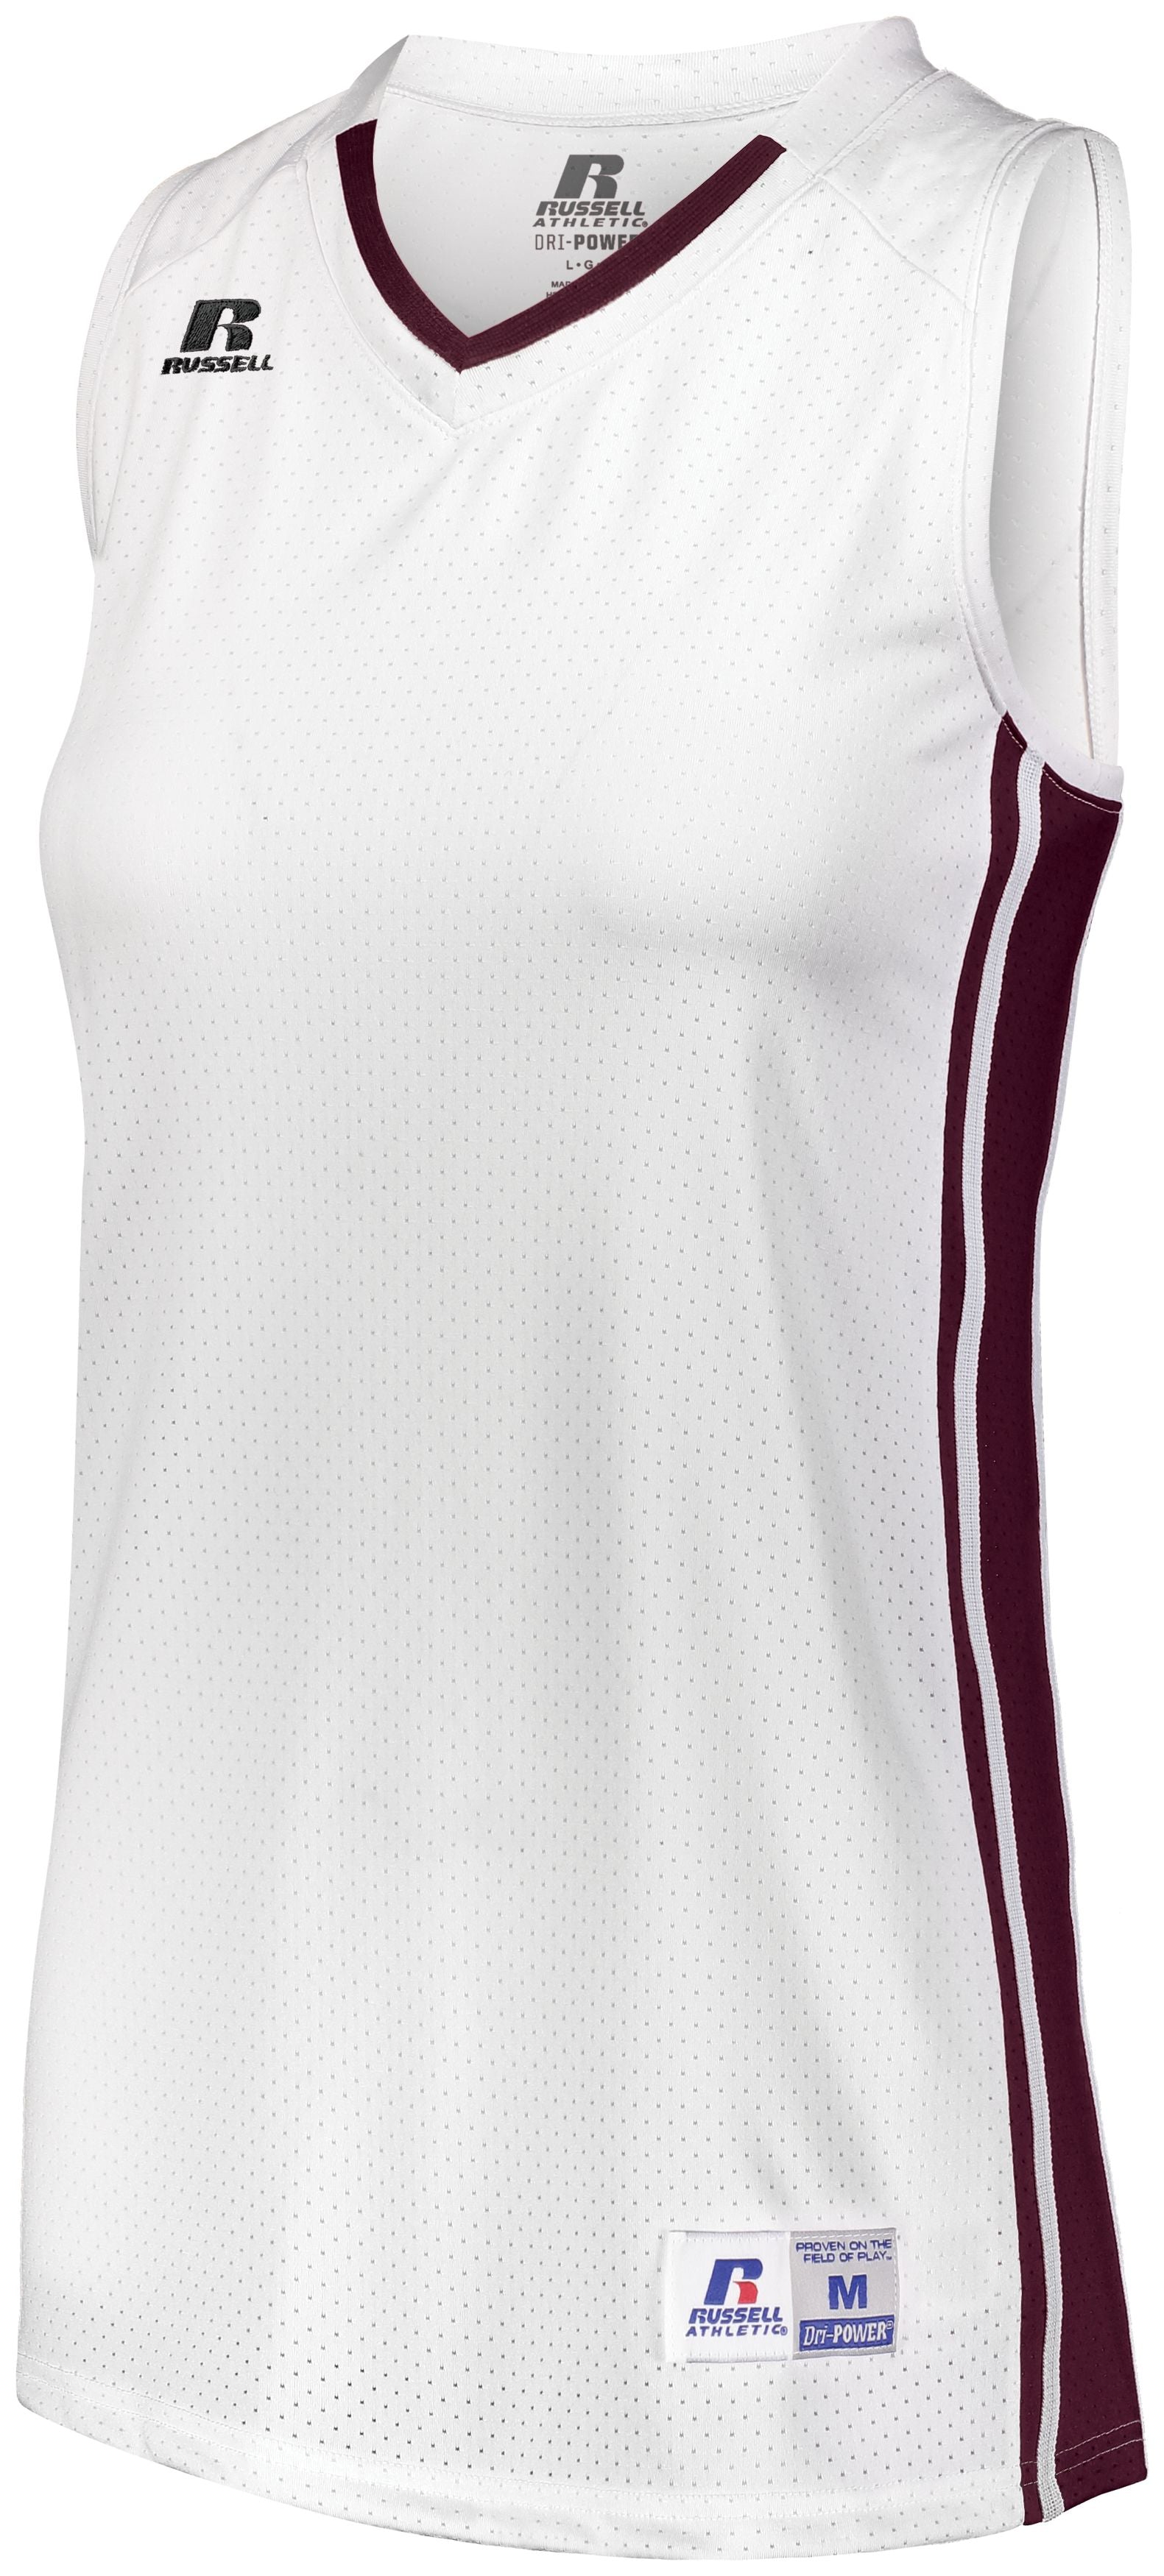 Russell Athletic Ladies Legacy Basketball Jersey in White/Maroon  -Part of the Ladies, Ladies-Jersey, Basketball, Russell-Athletic-Products, Shirts, All-Sports, All-Sports-1 product lines at KanaleyCreations.com